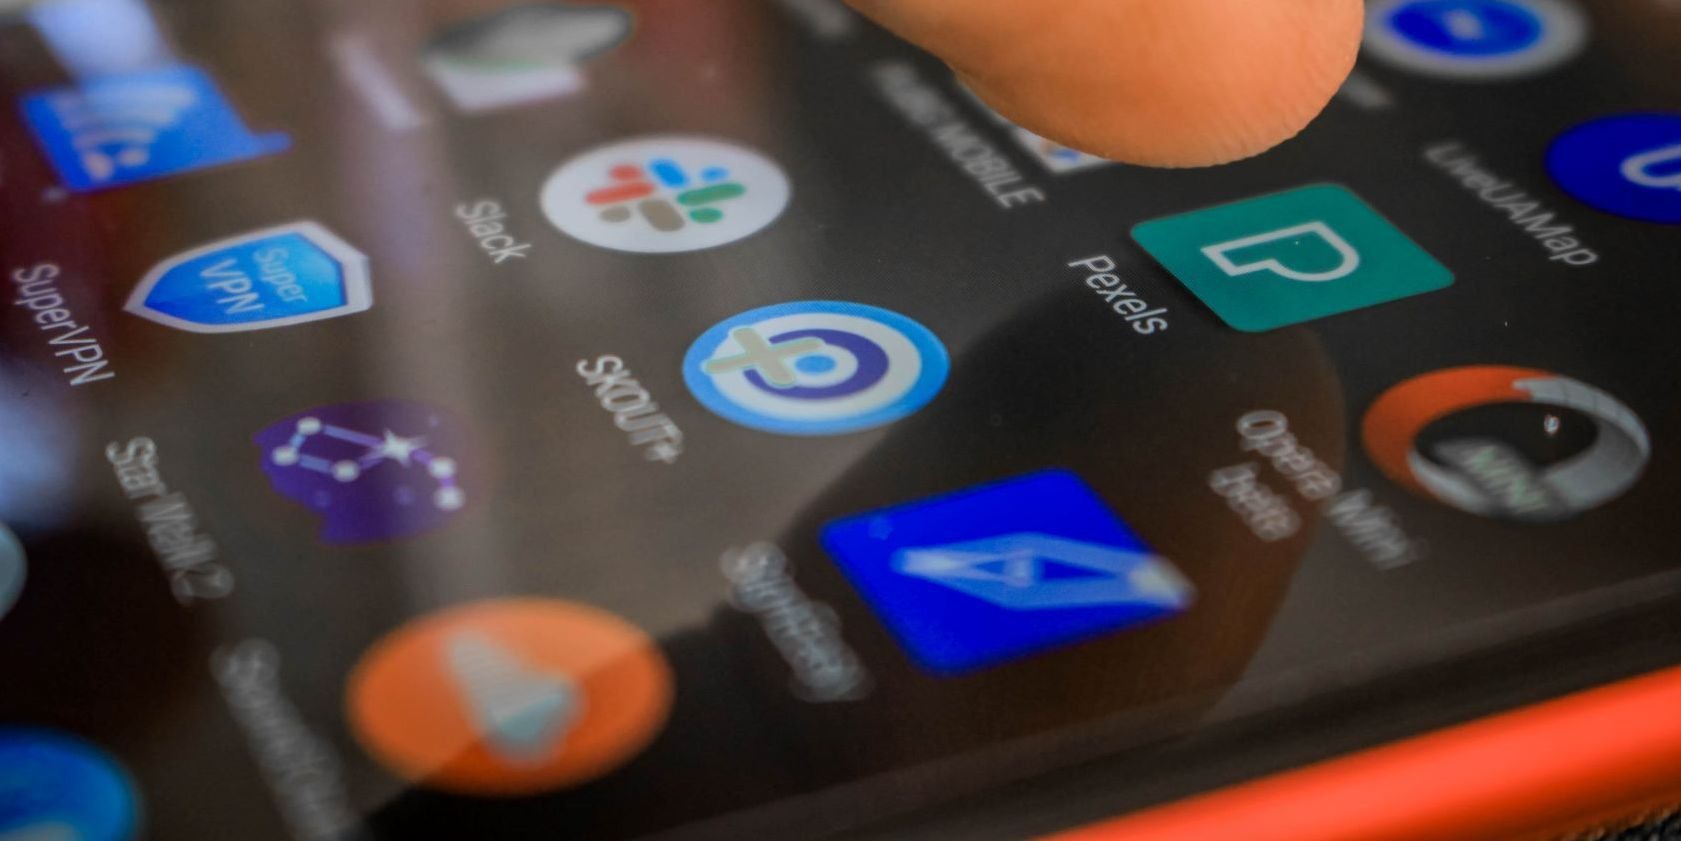 9 Useful Android Apps That'll Make Your Phone Smarter